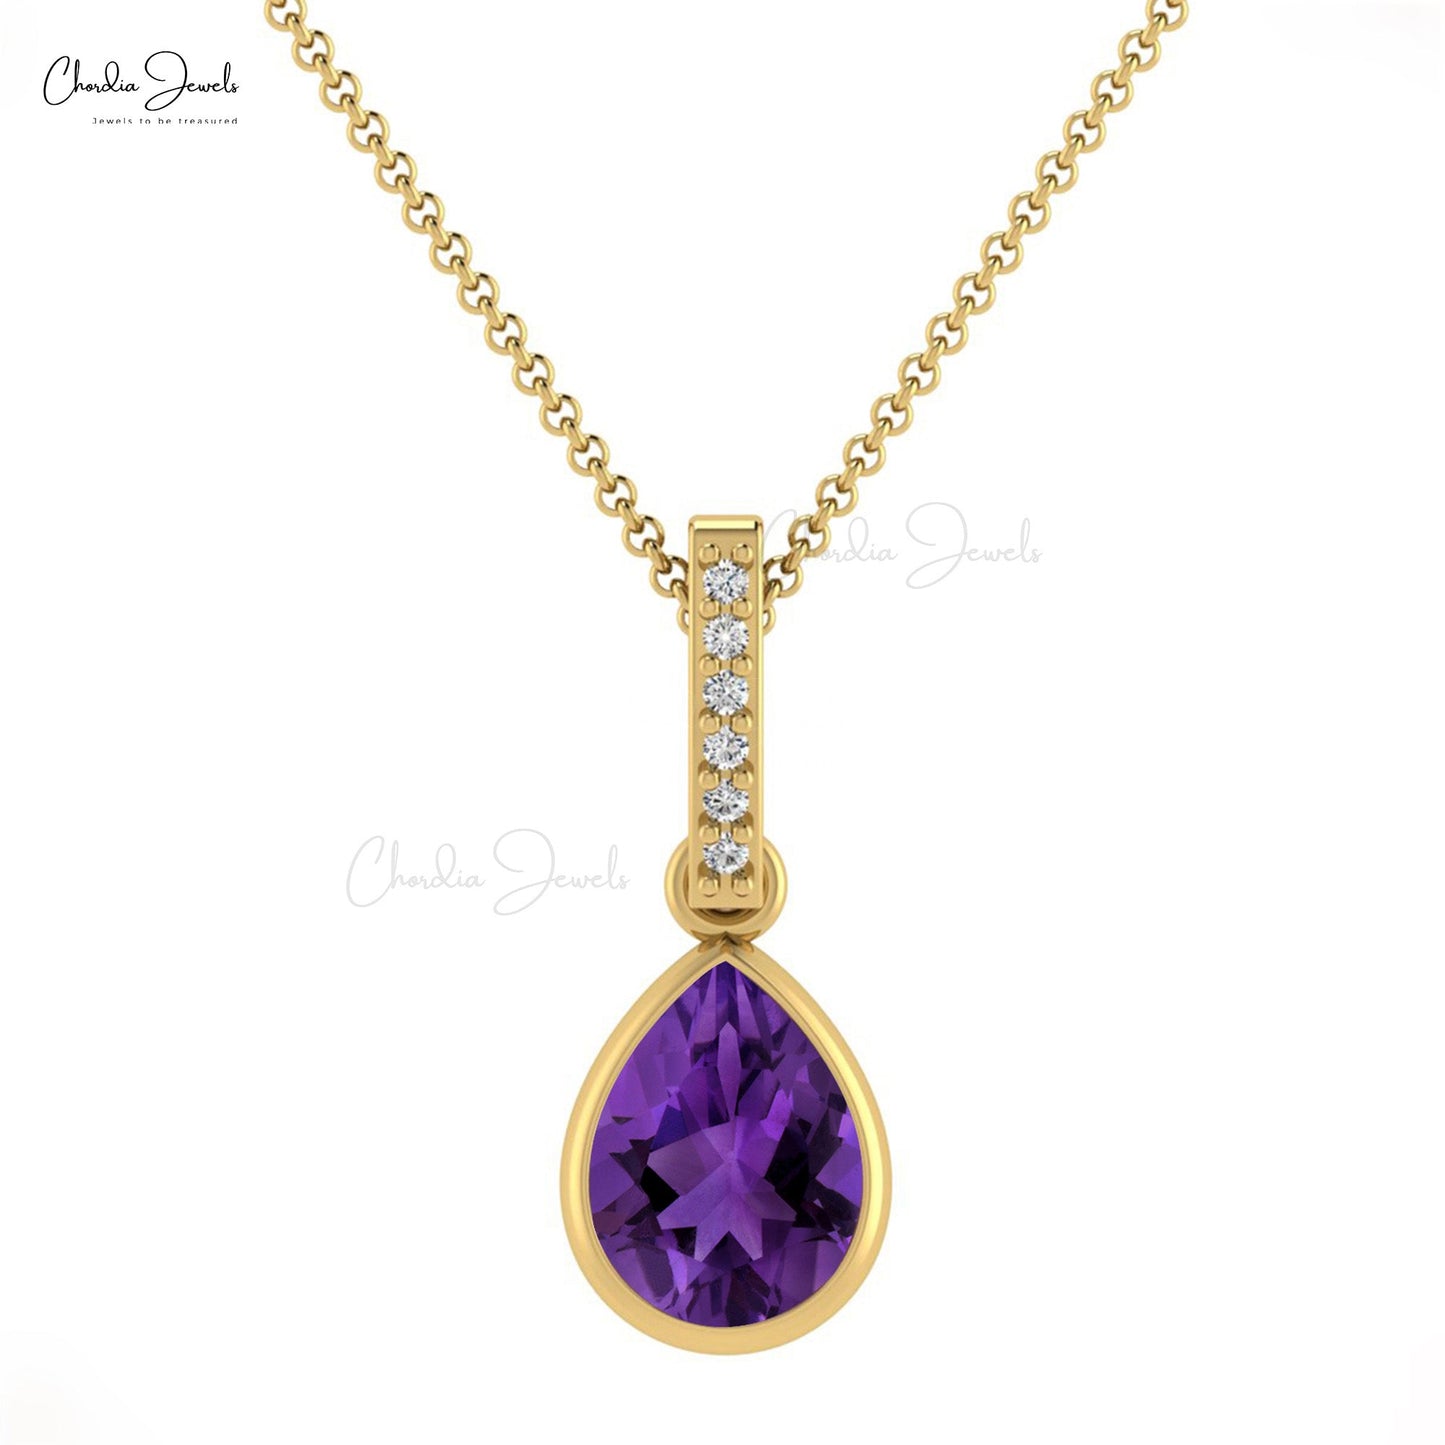 Natural Amethyst and Diamond Pendant, 14k Solid Gold Gemstone Pendant, 8x6mm Pear Shape Gemstone Pendant Gift for Wife